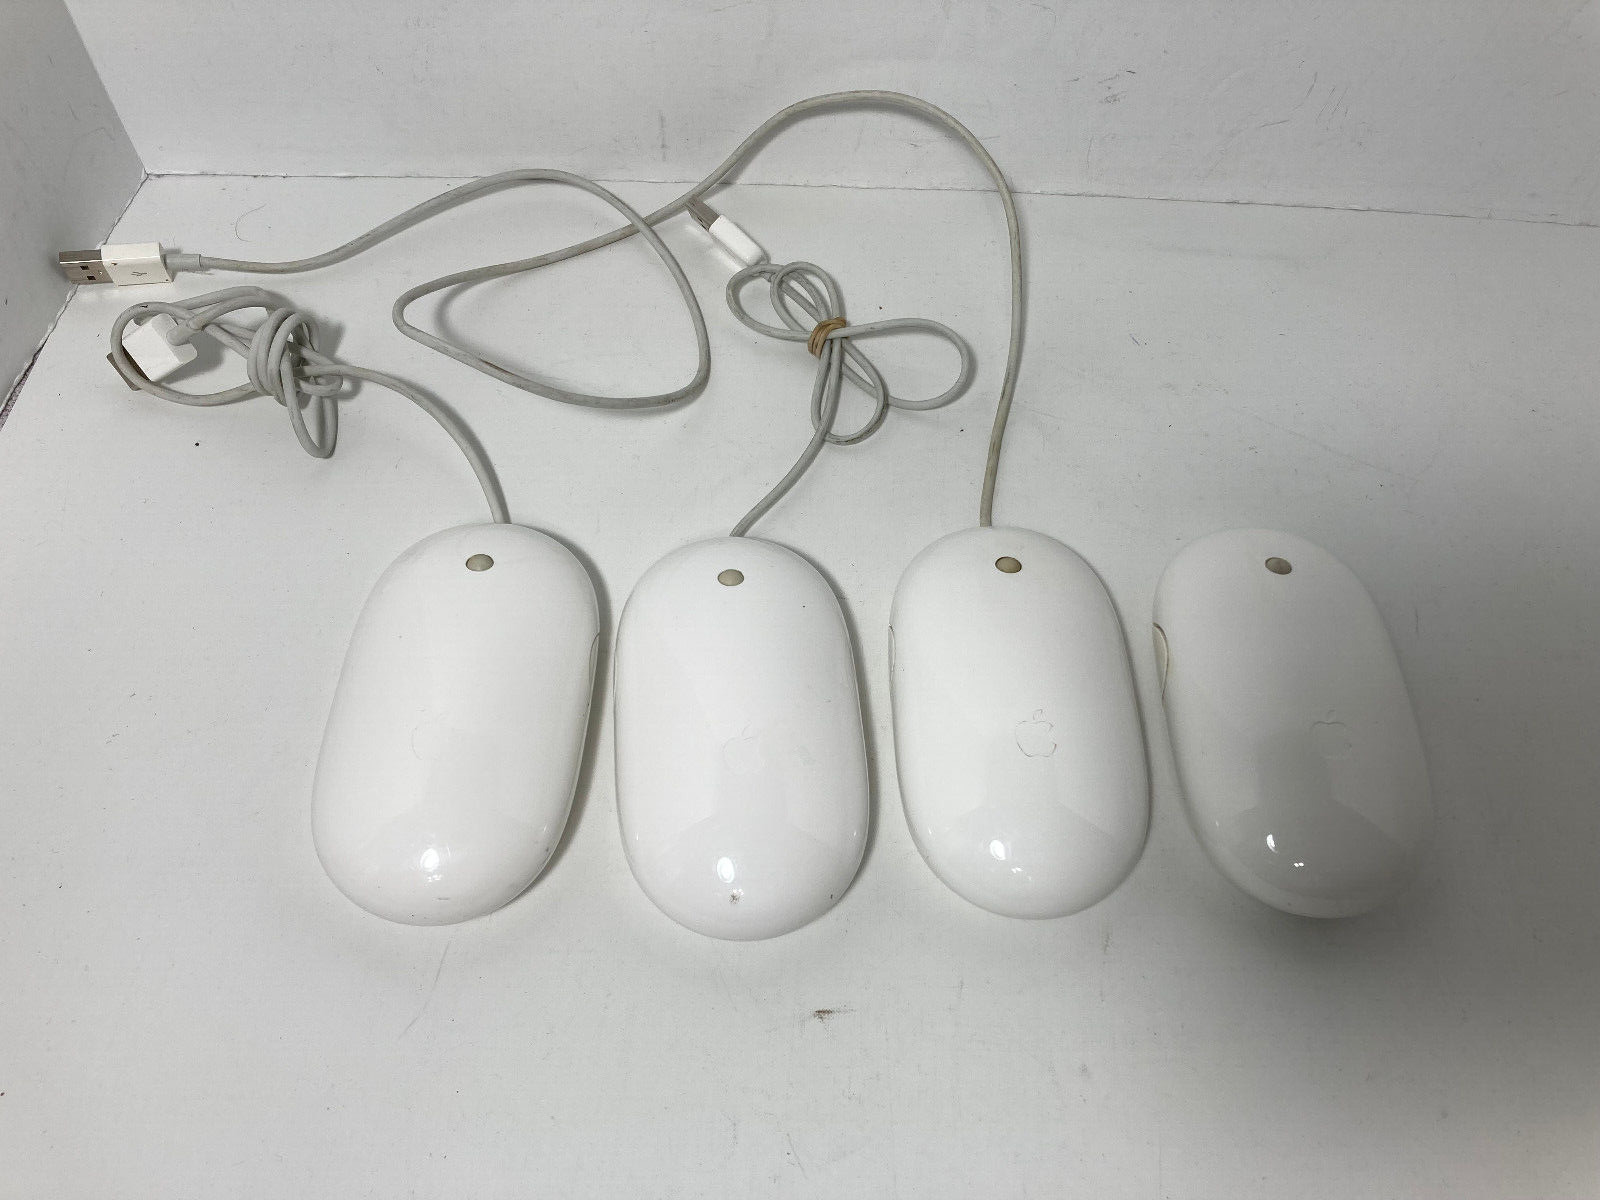 Mixed Lot of 4 Apple A1152 A1197 White Mighty Mouse for Vintage iMac MacBook